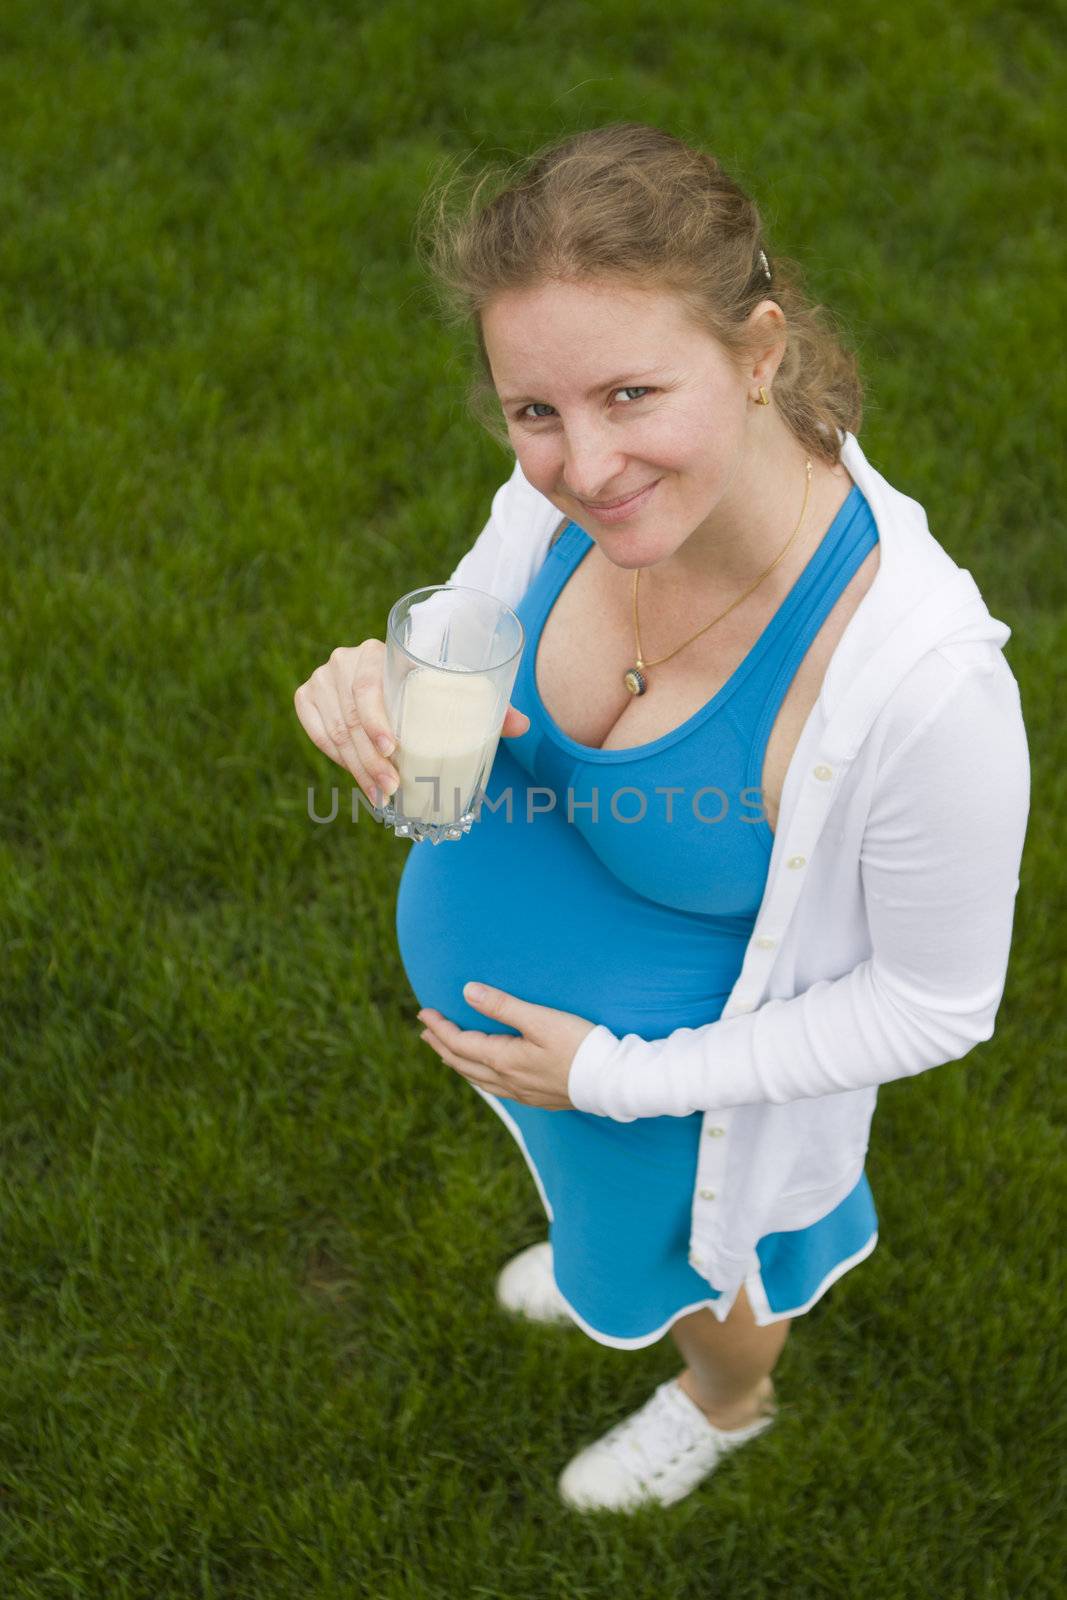 A helathy woman posing with a glass of milk in her blue outfit.